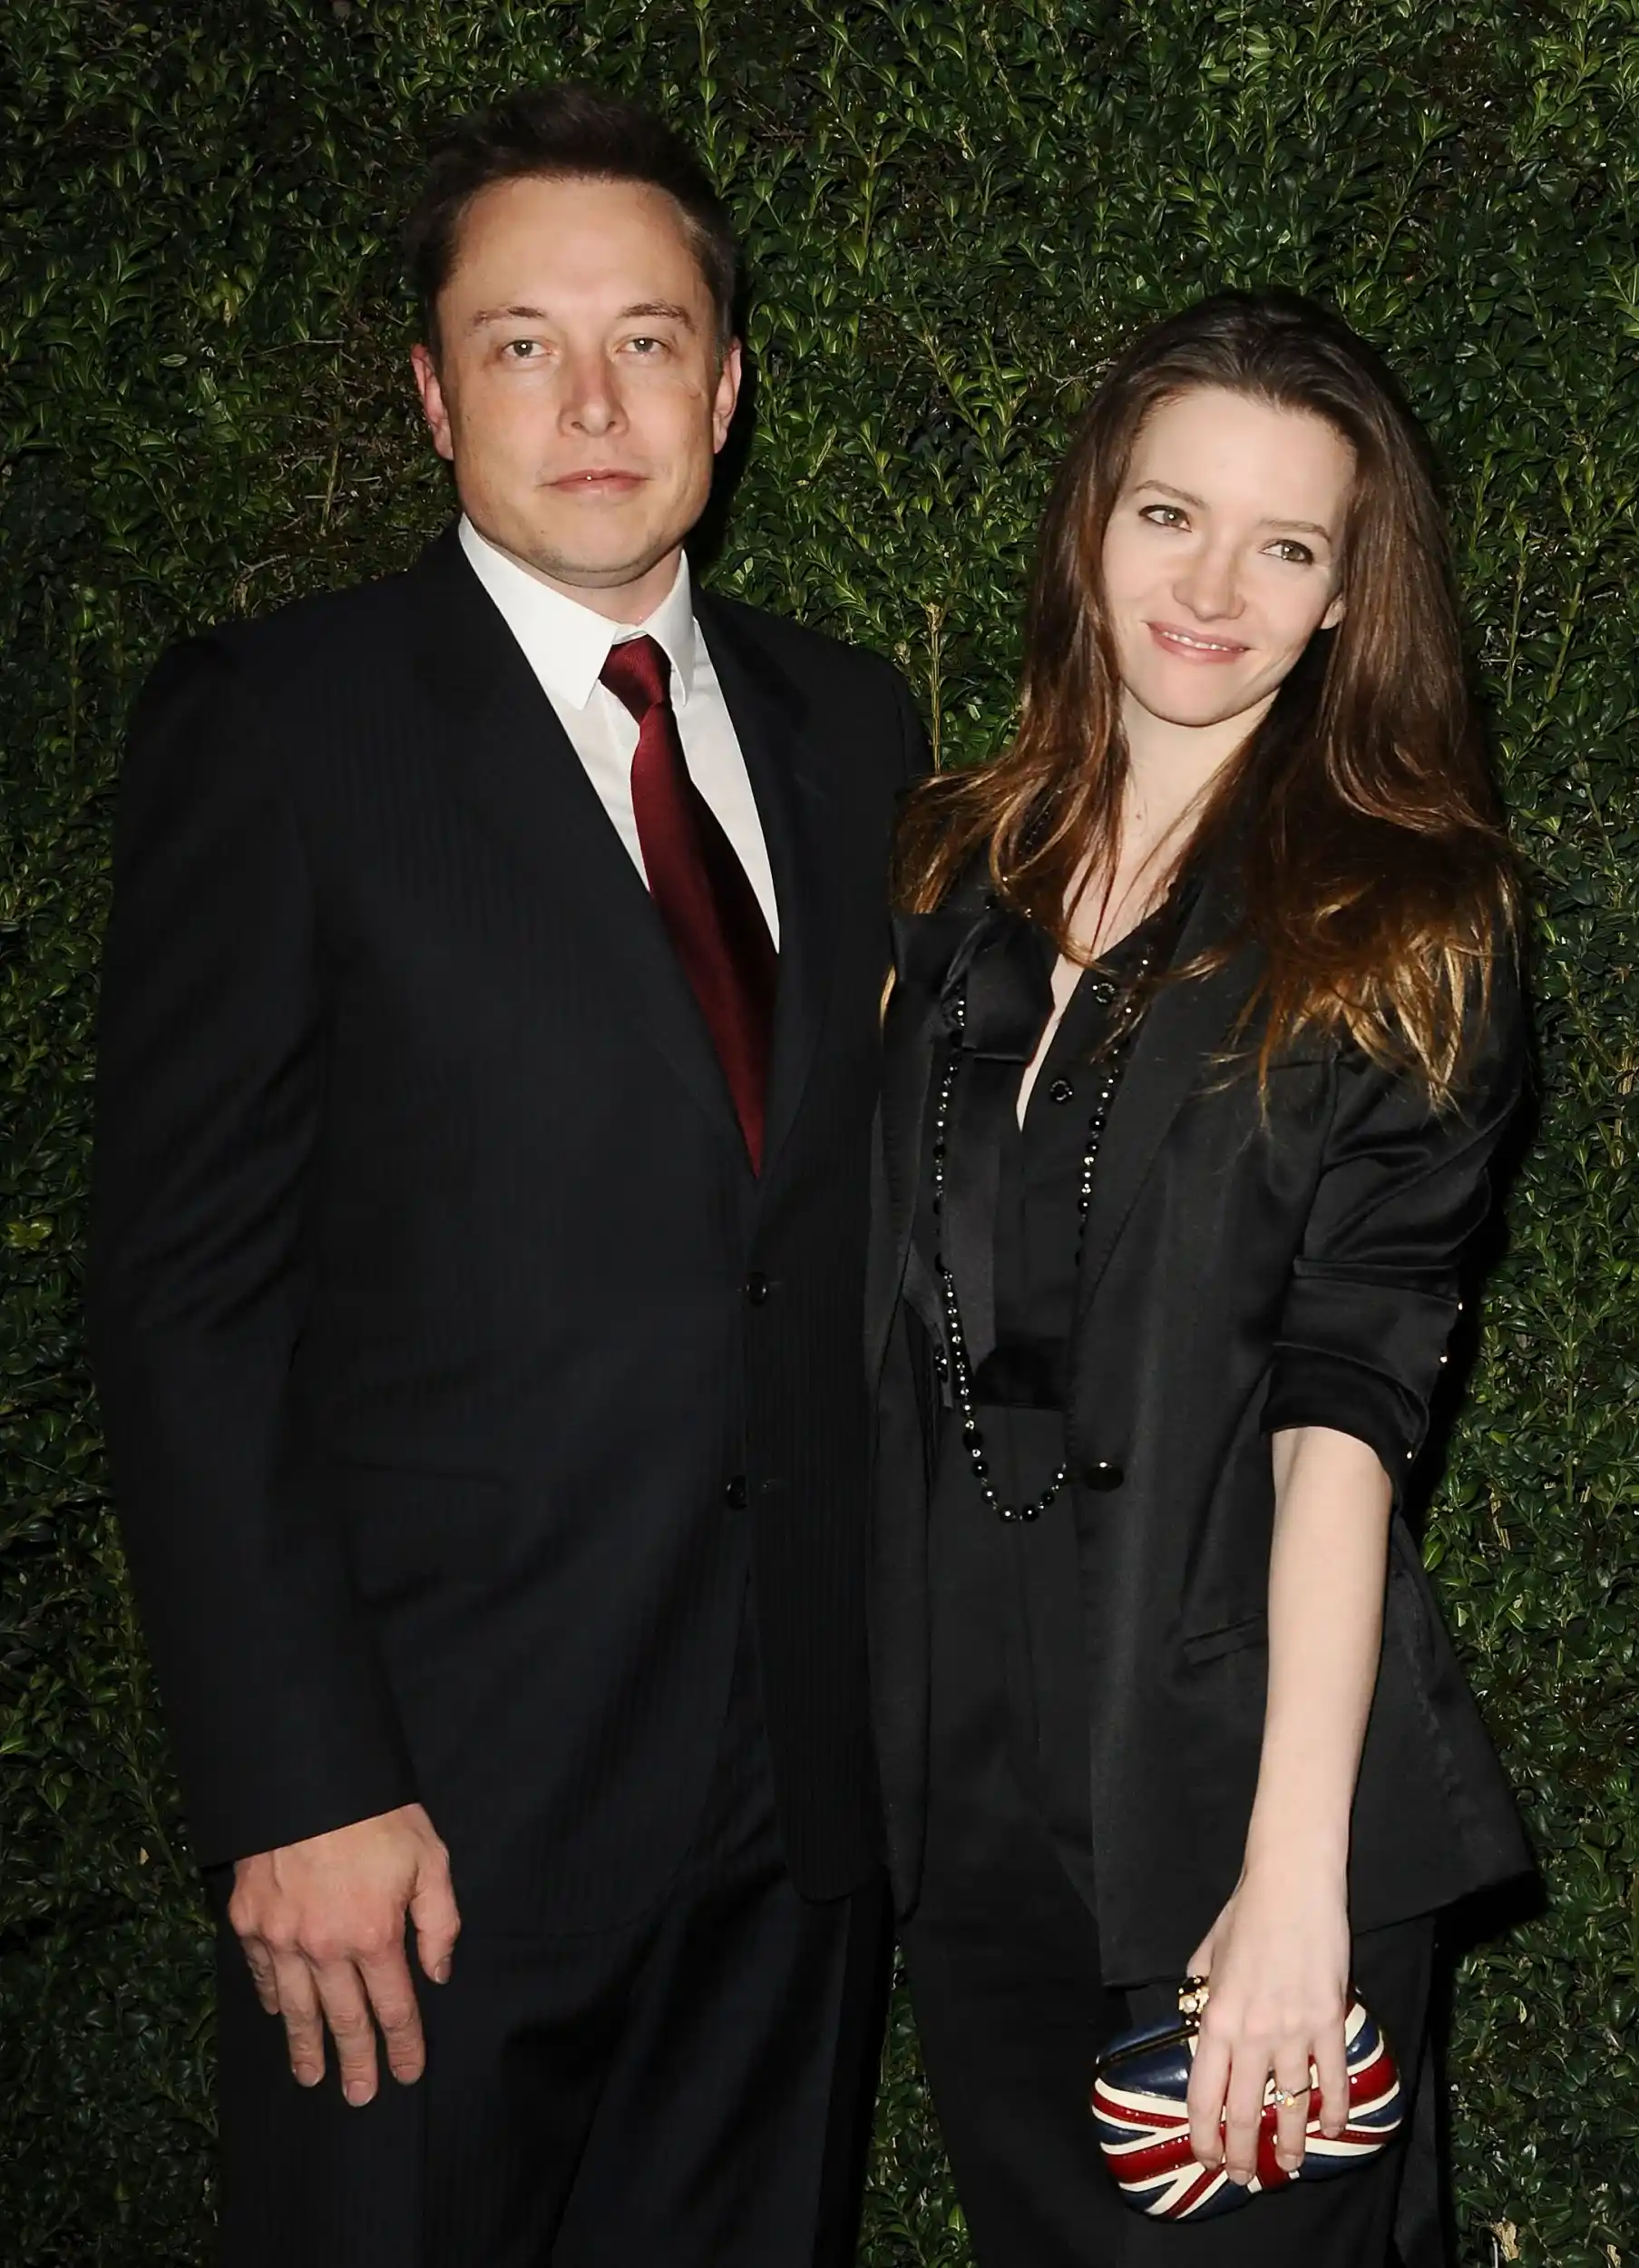 Ex-wife Talulah Riley denies Ghislaine Maxwell hired her as a “novia infantil” for Tesla and SpaceX CEO Elon Musk.